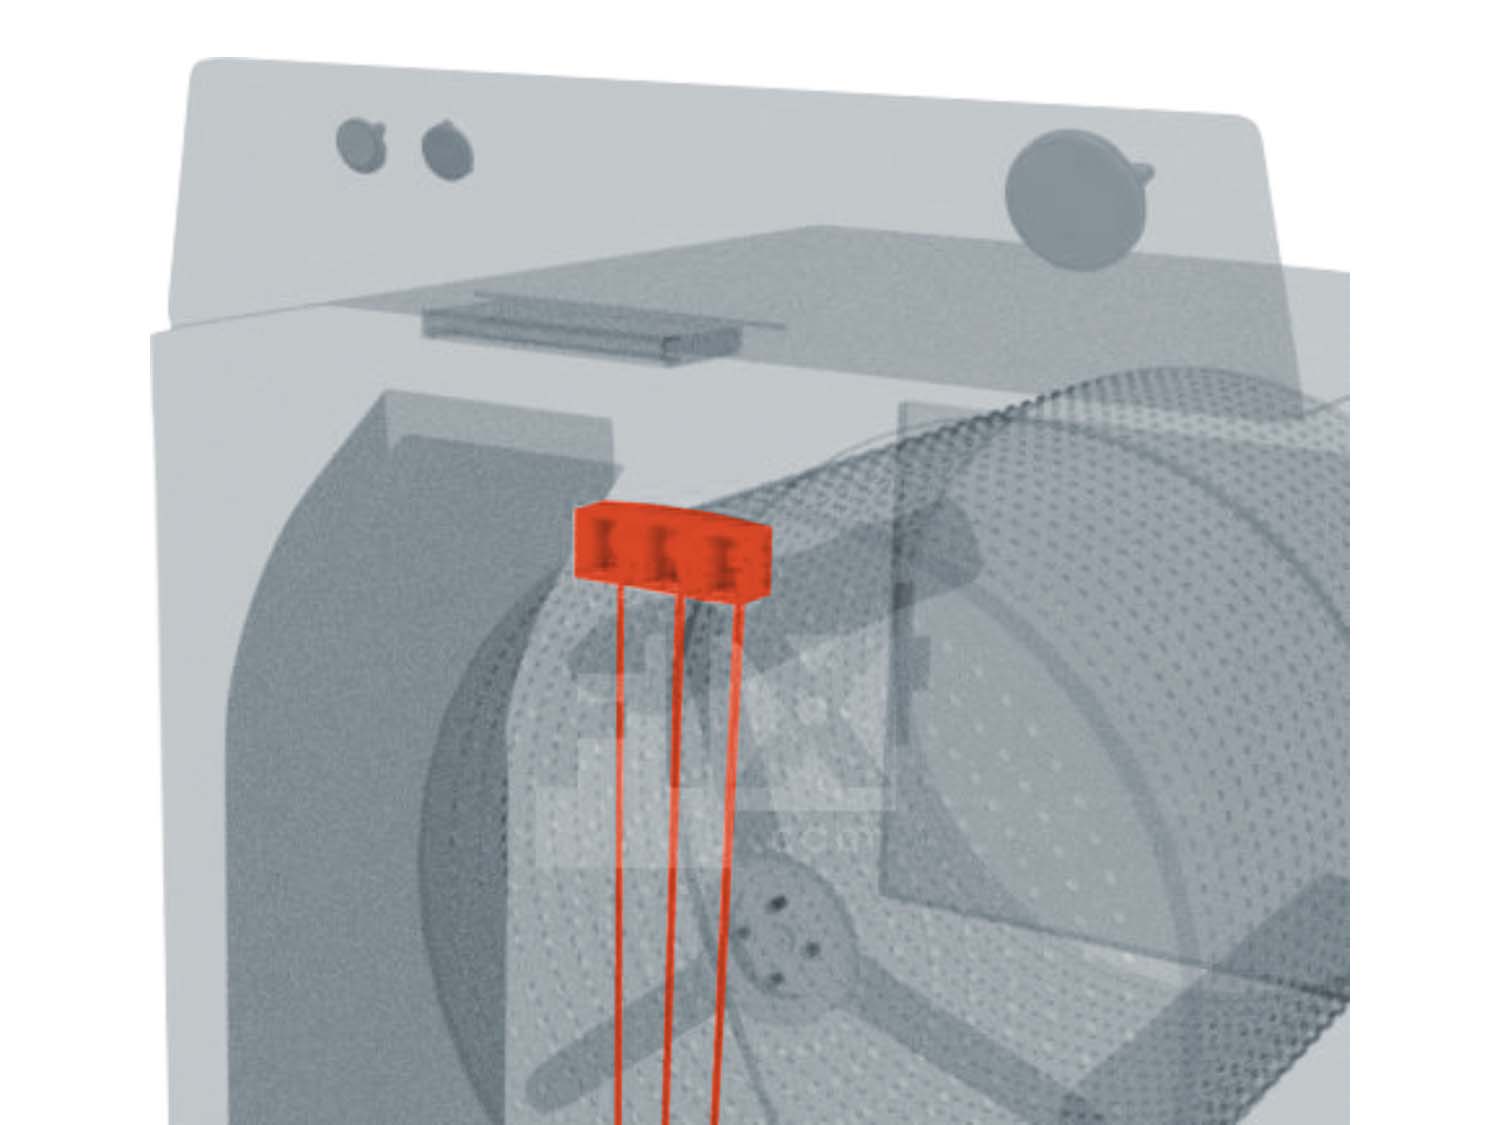 A 3D diagram showing the components of a dryer and specifying the location of the terminal block